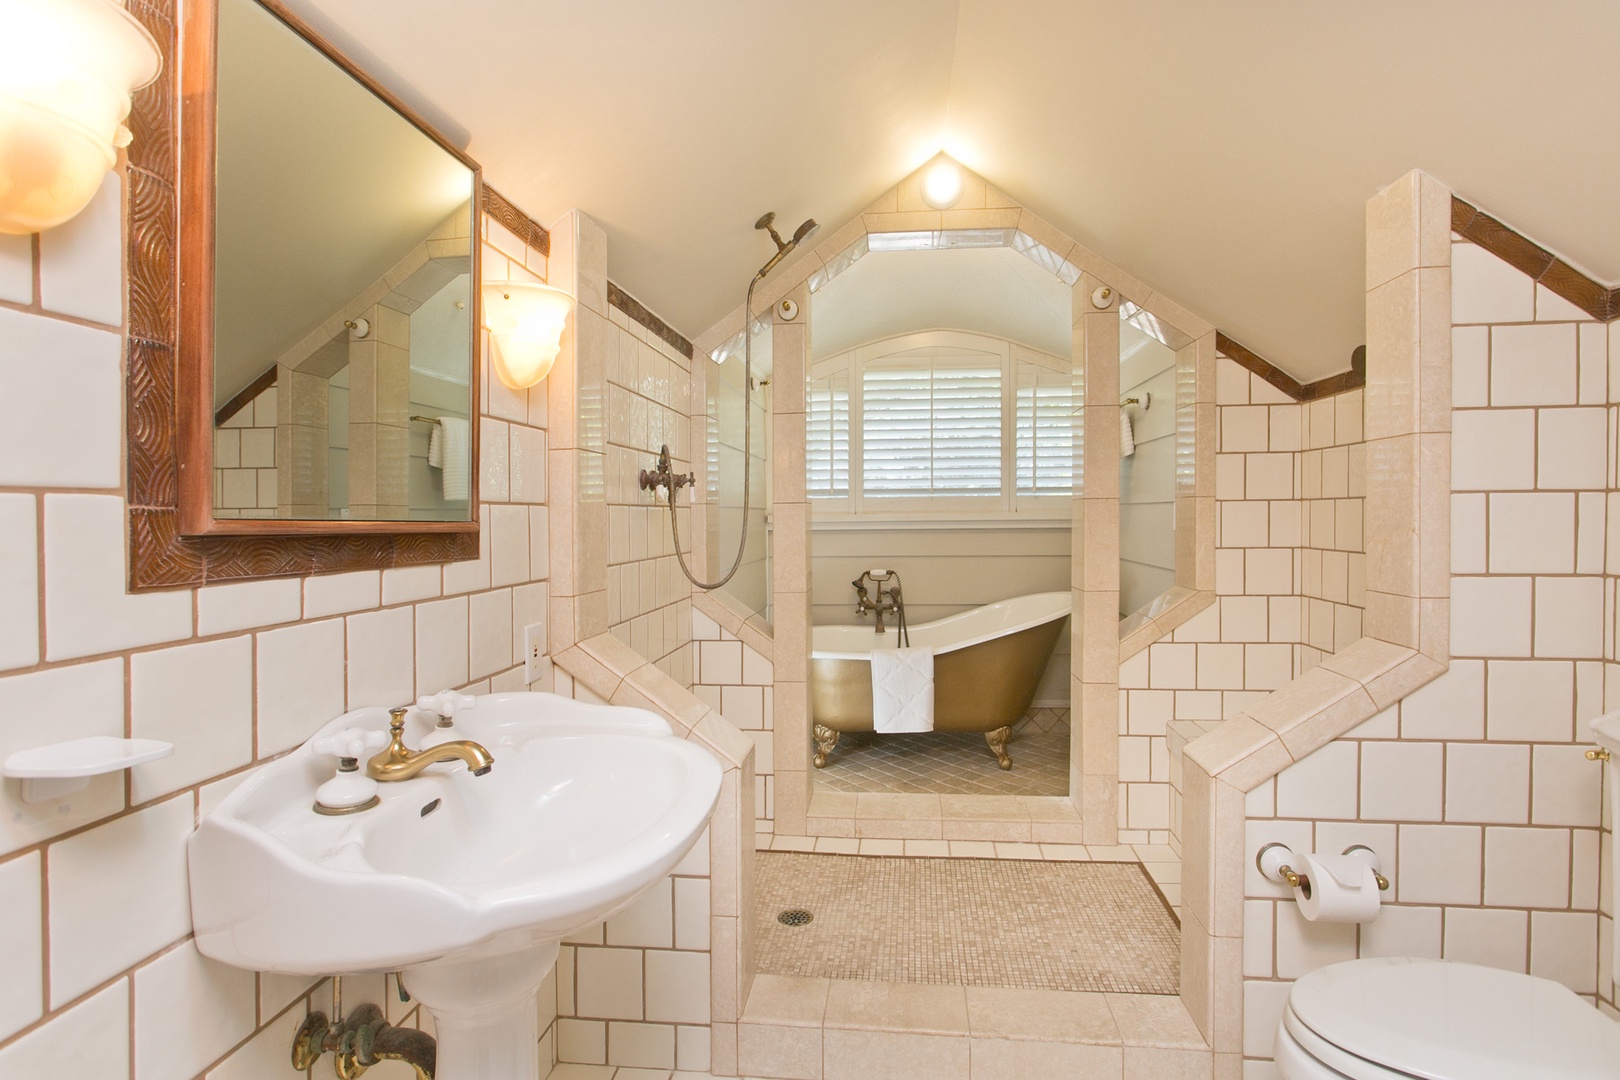 Kailua Vacation Rentals, Hale Melia* - Indulge in a spa-like retreat in this spacious bathroom with a classic touch and modern amenities.